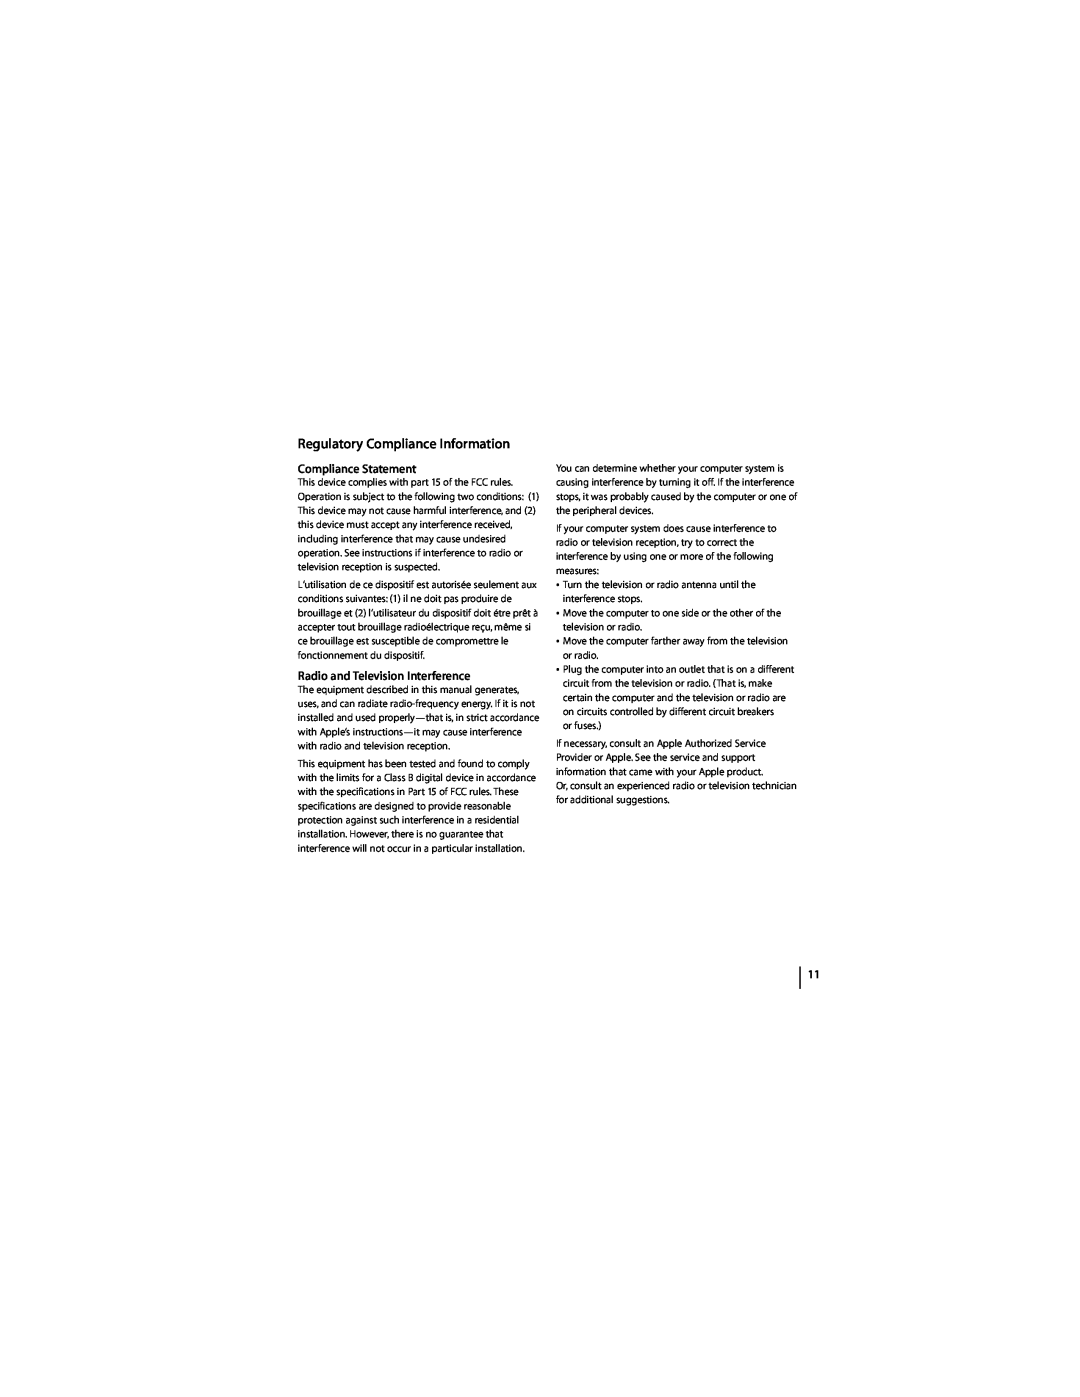 Apple 2A034-4760-A manual Regulatory Compliance Information, Compliance Statement, Radio and Television Interference 